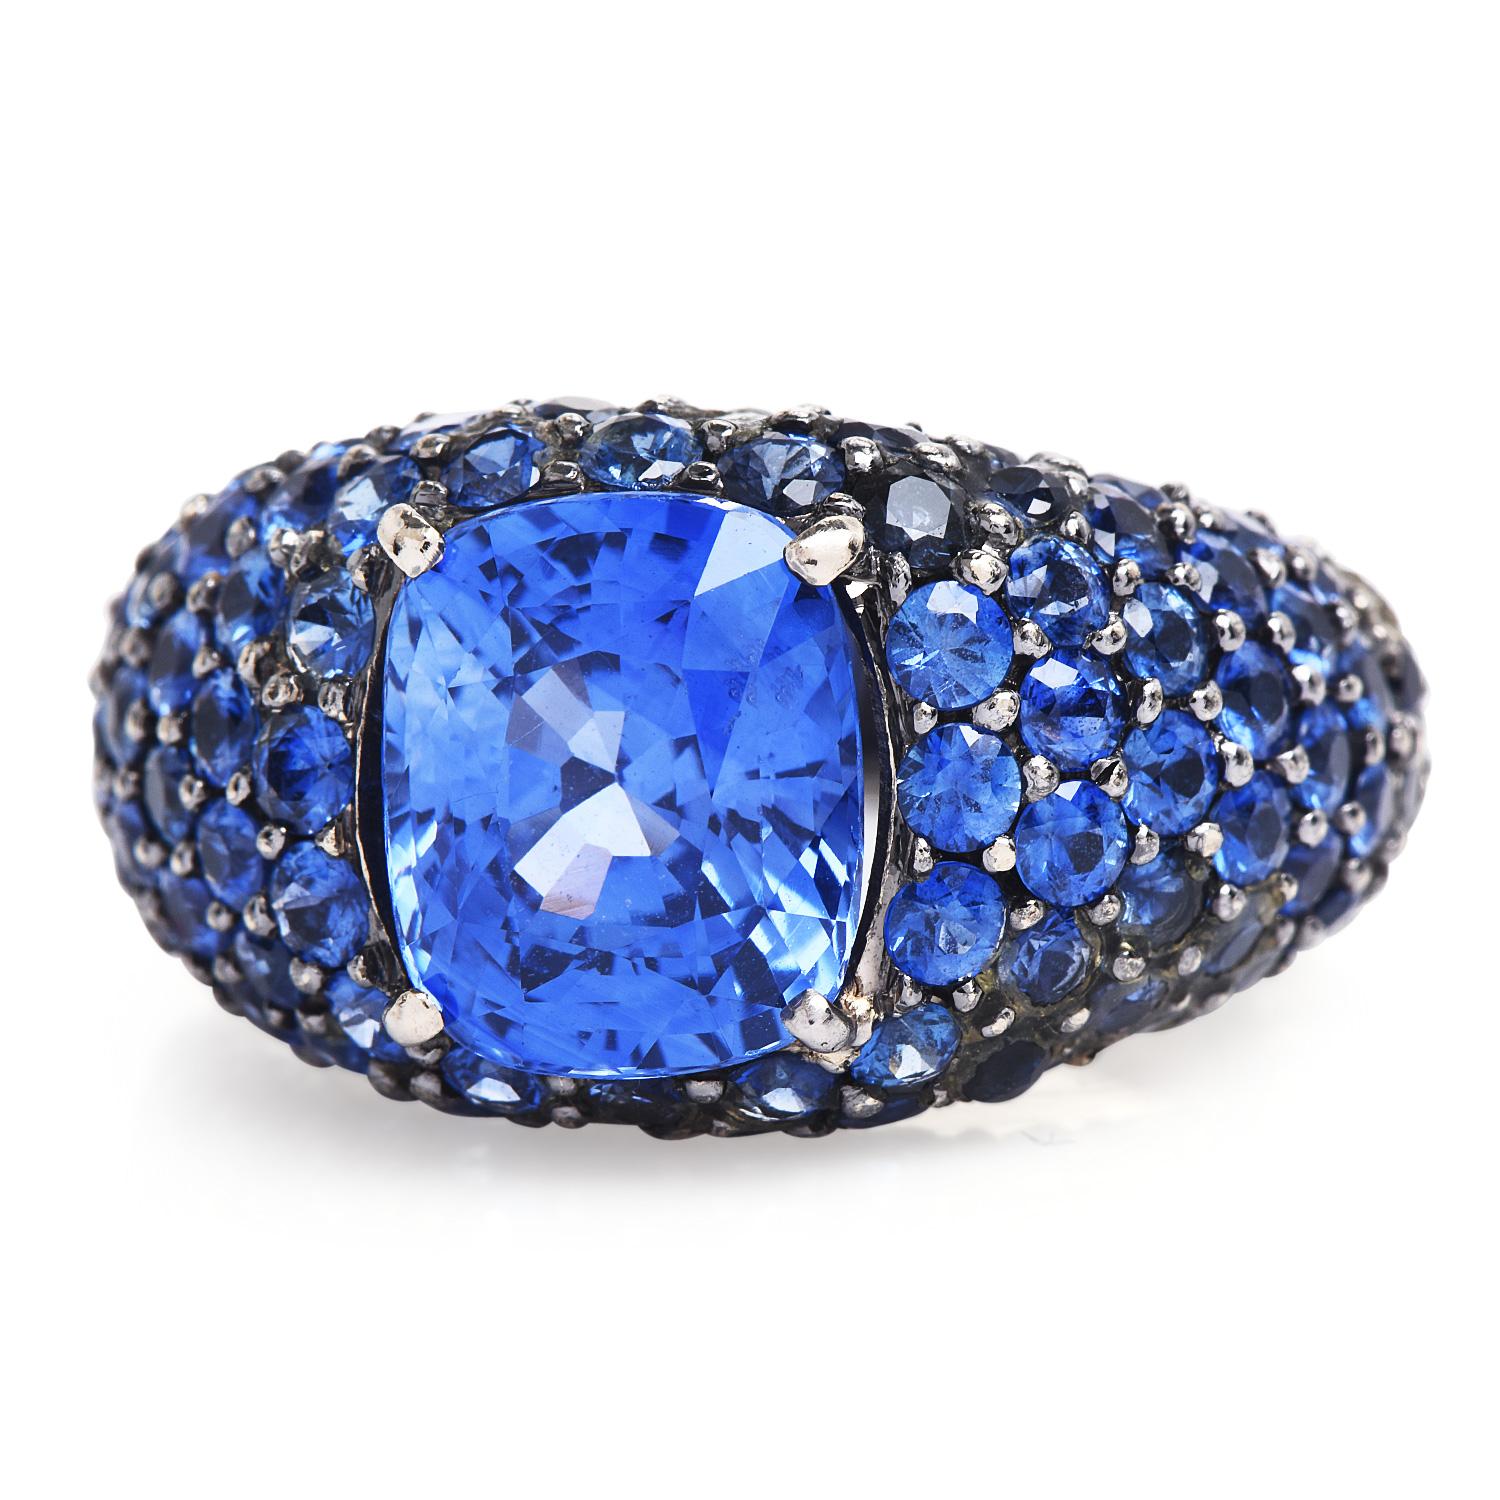 This beautiful, exquisite vivid & bright blue Sapphire & Diamond ring is covered in fine sapphire gemstones & centered by a genuine Sri Lankan sapphire.

Crafted in 18K White Gold with a Black Finish. 

An alluring Cushion Cut, GIA certified Blue